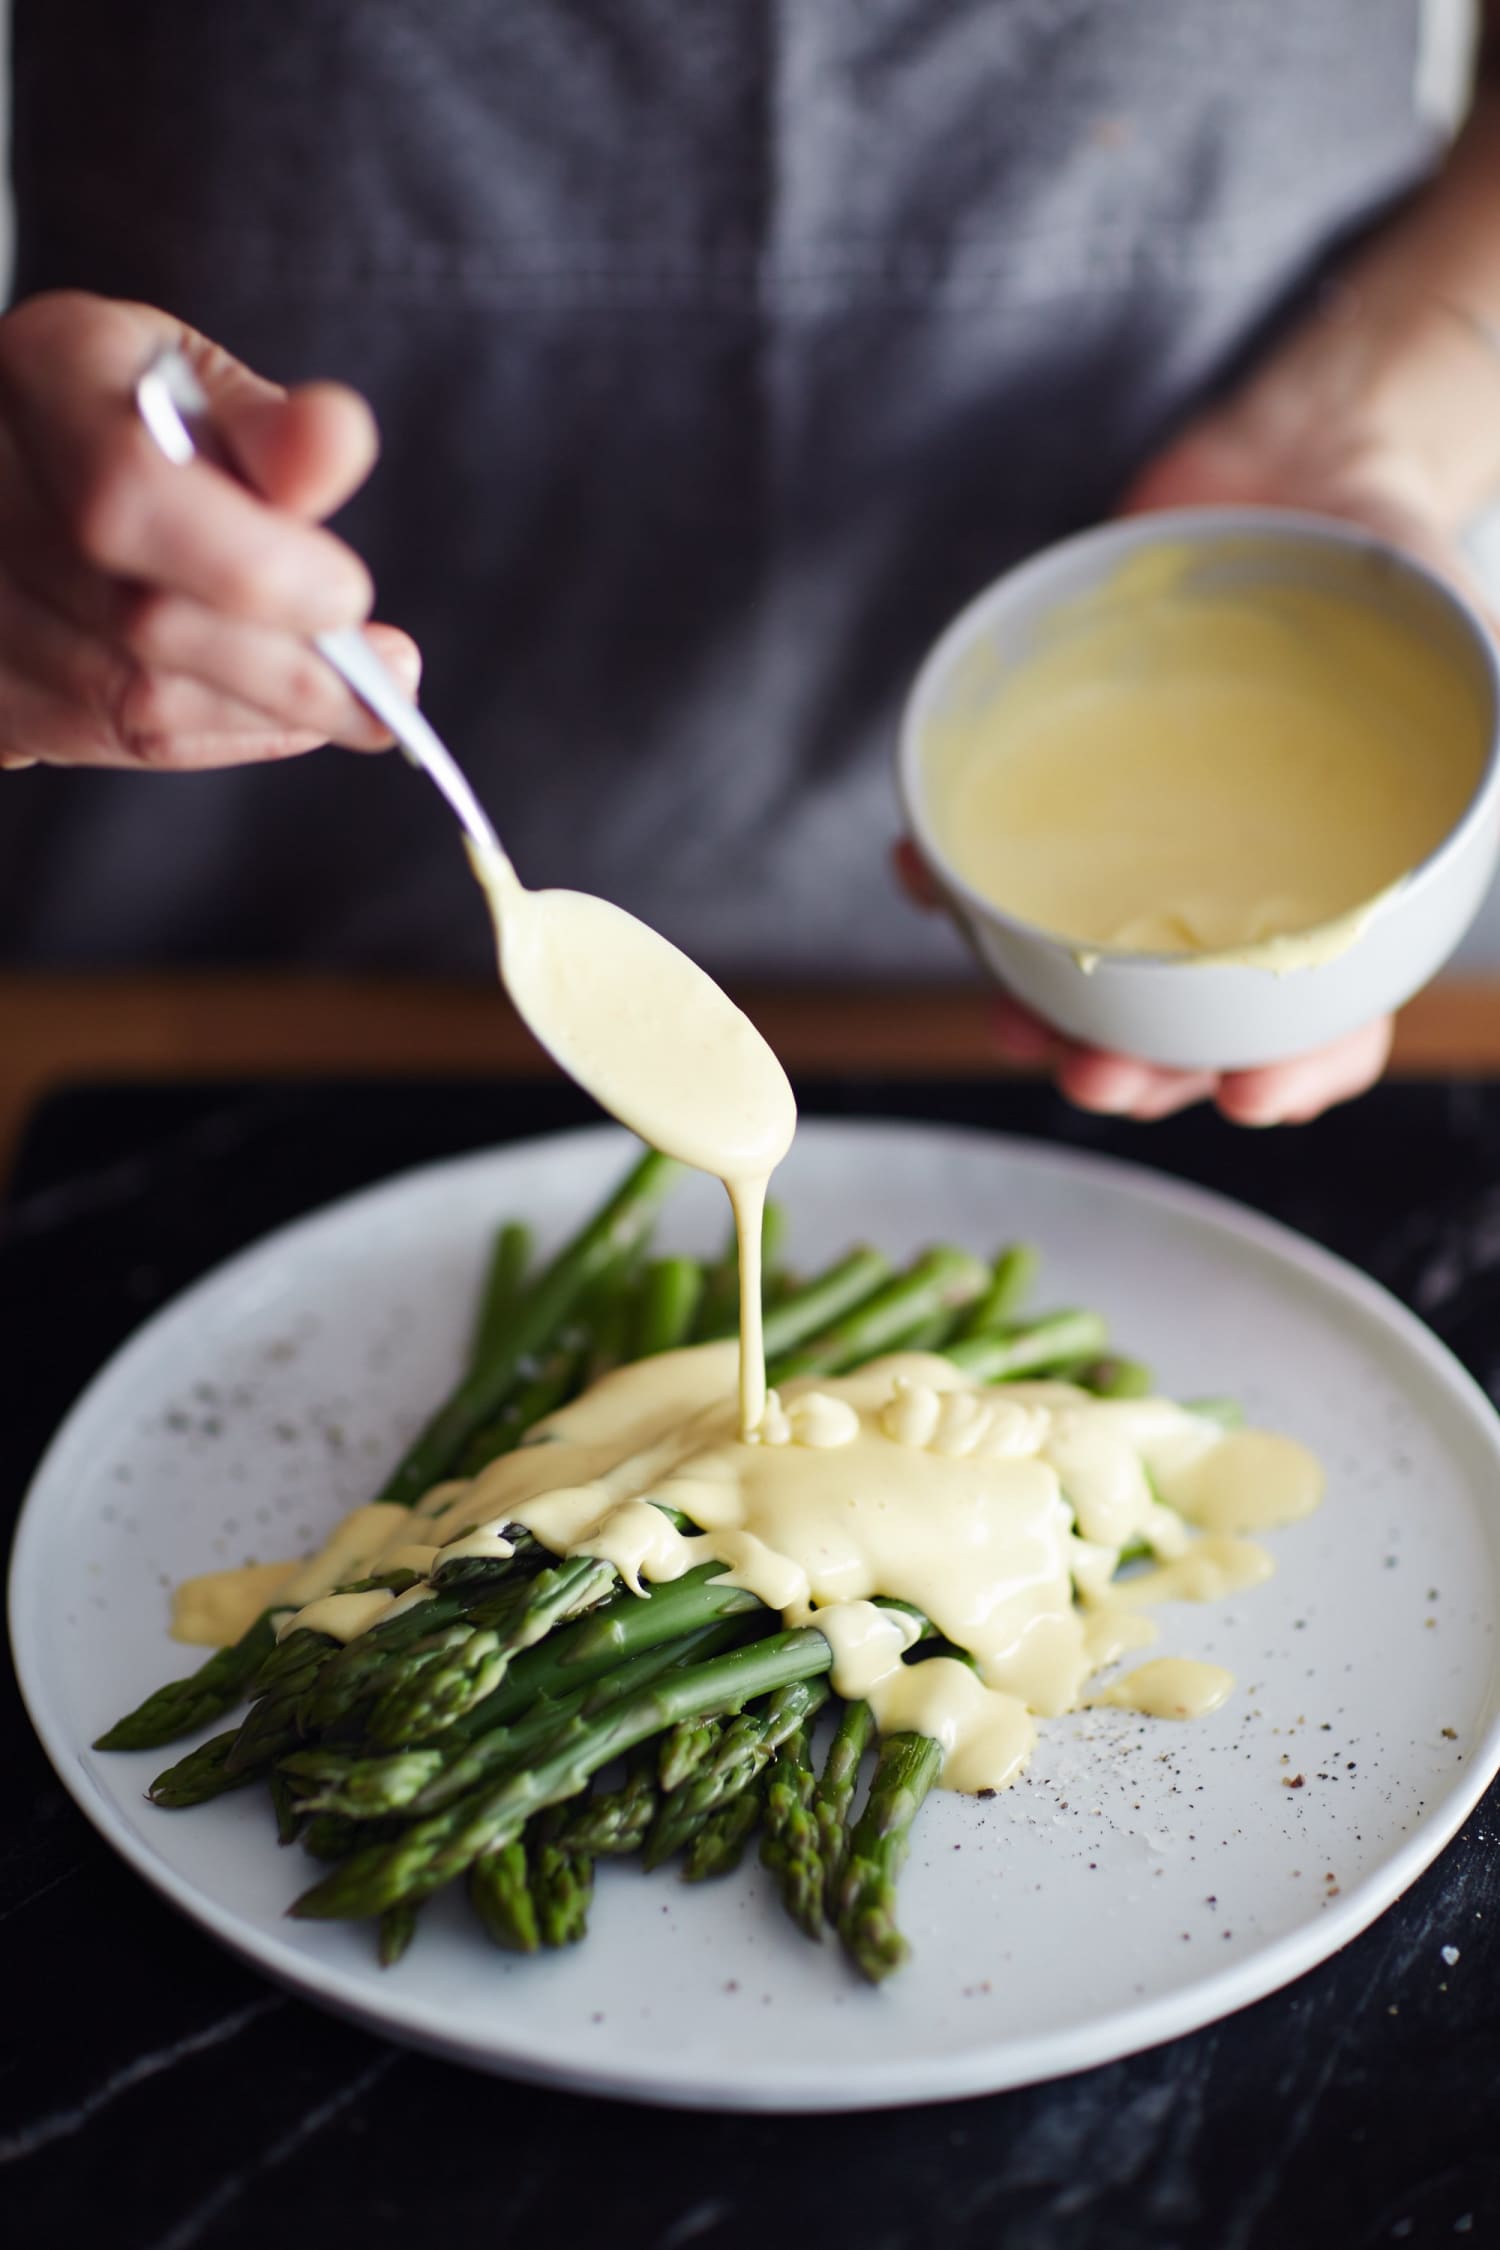 How To Make Hollandaise Sauce in a Blender